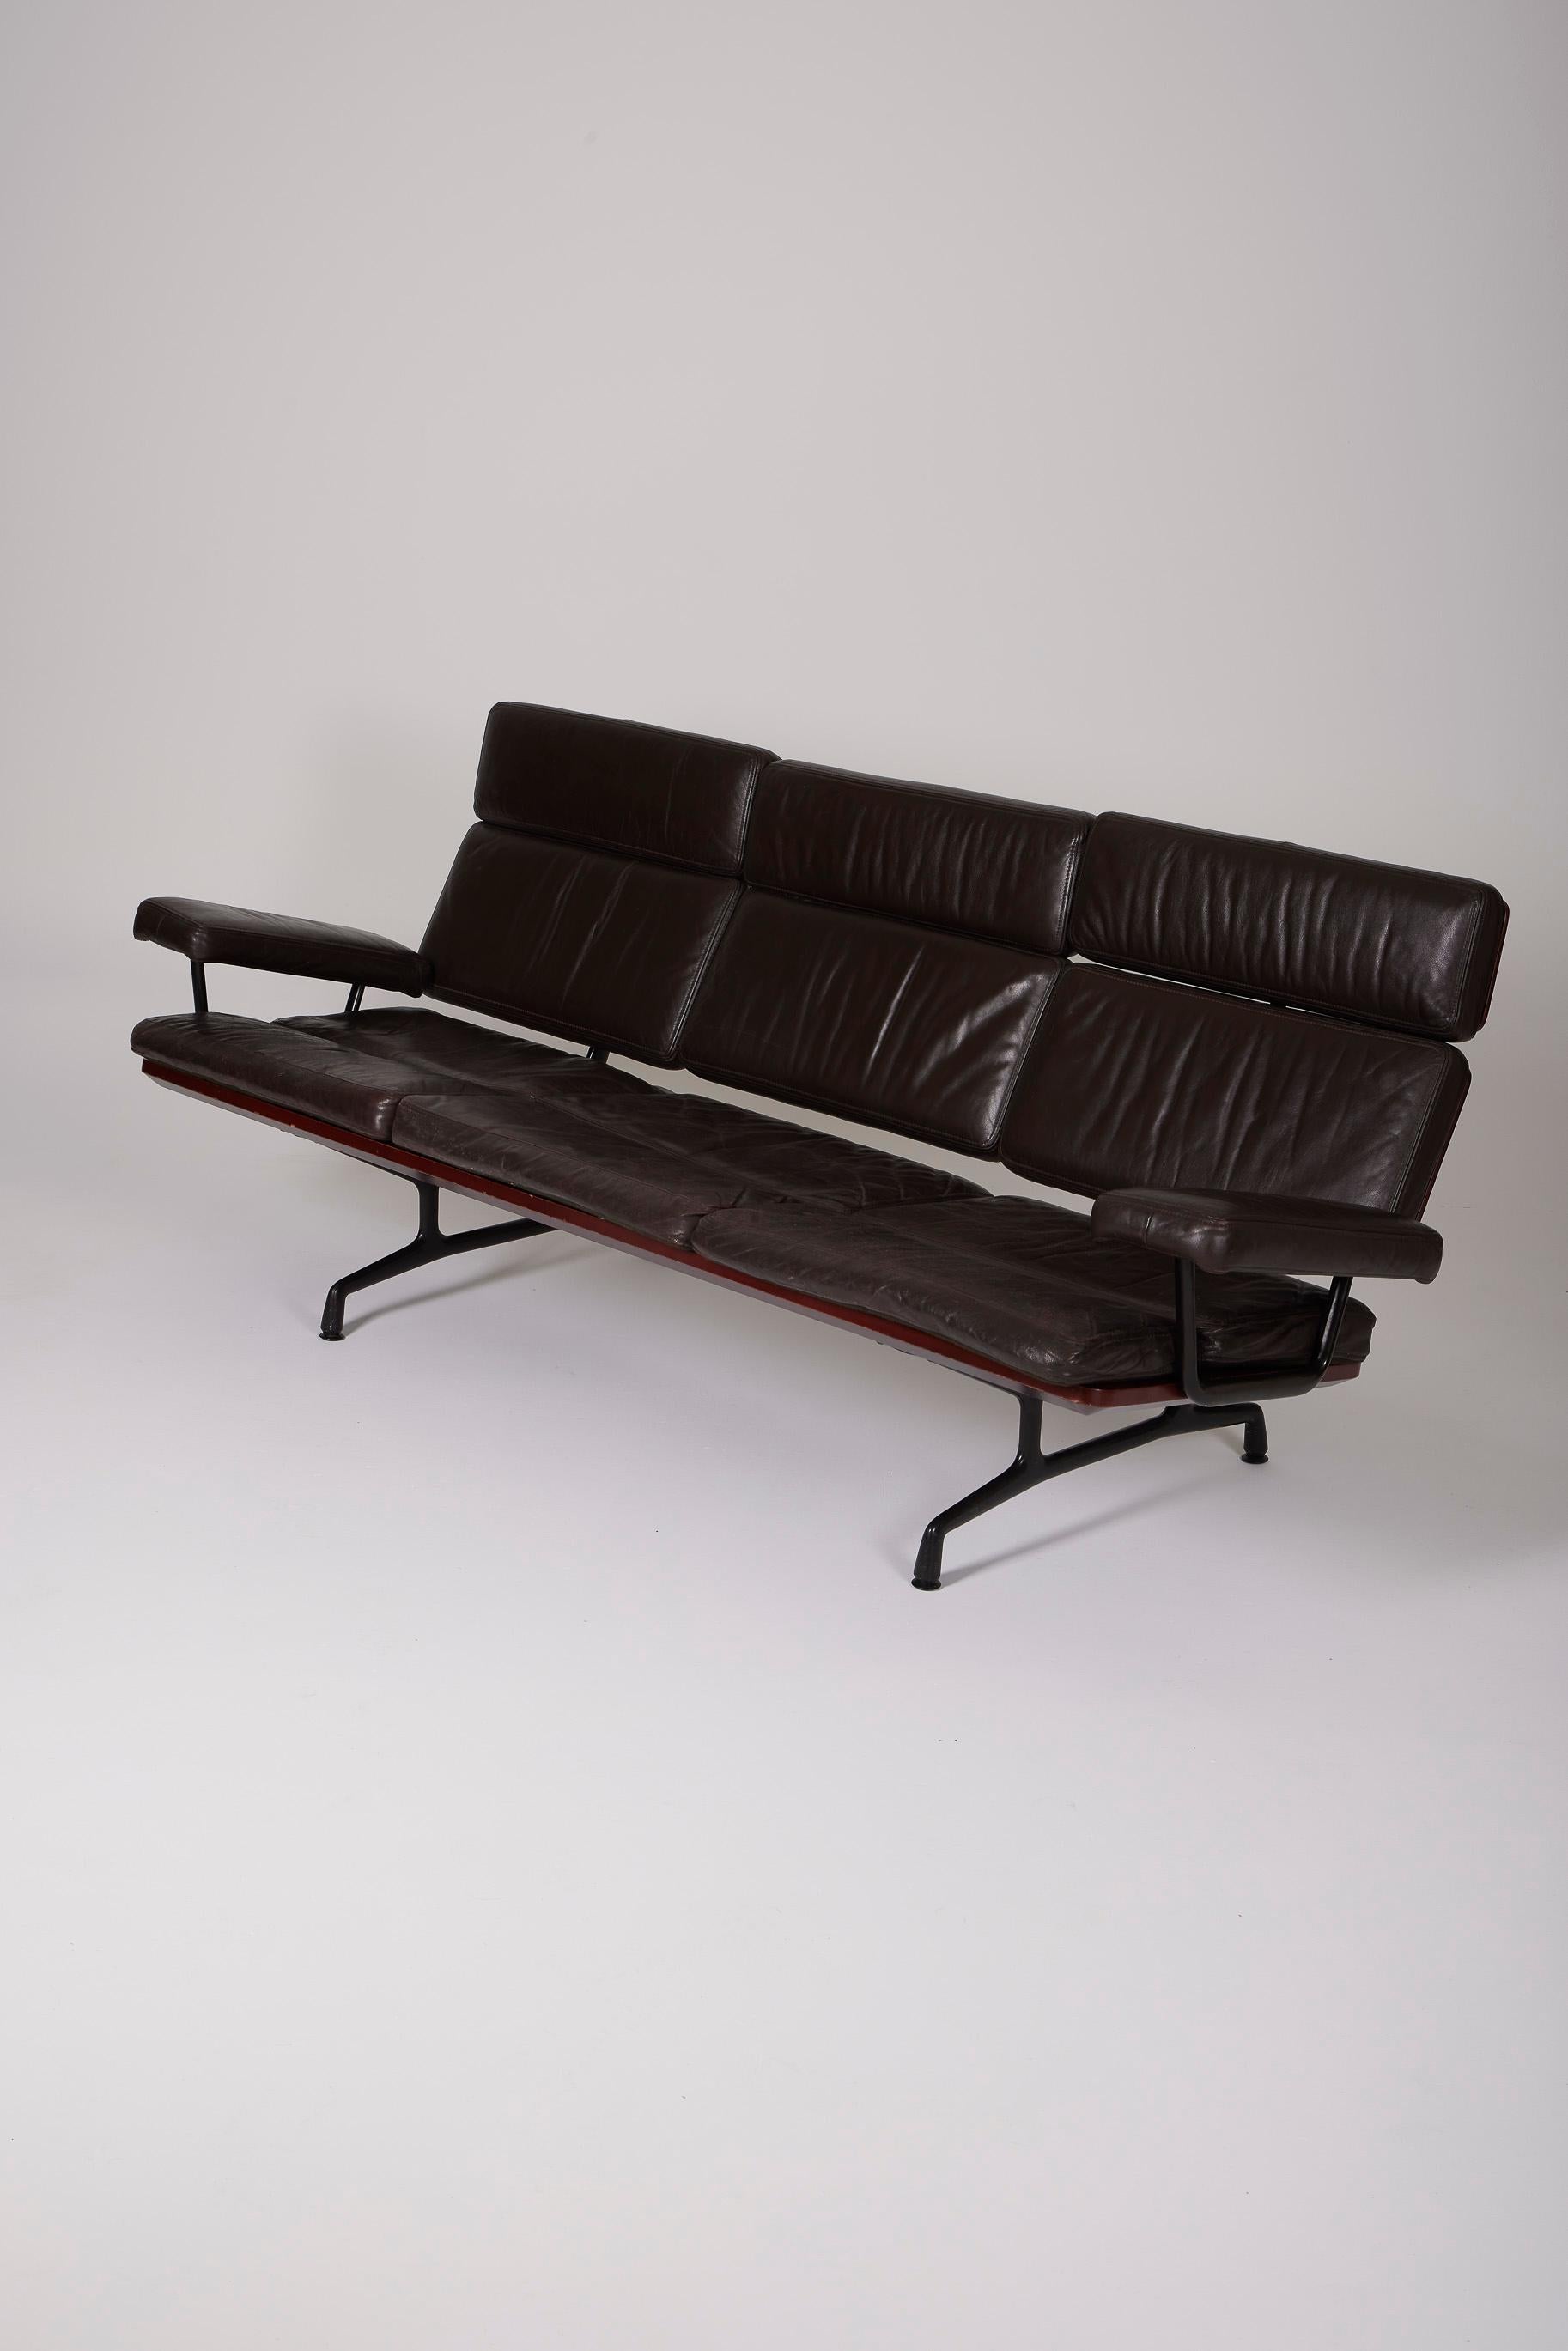 3-seater sofa model ES108 by designers Ray and Charles Eames for Herman Miller, 1980s. The base is in polished aluminum. The seat and back are in brown leather. The original leather is patinated. Good condition.
DV528